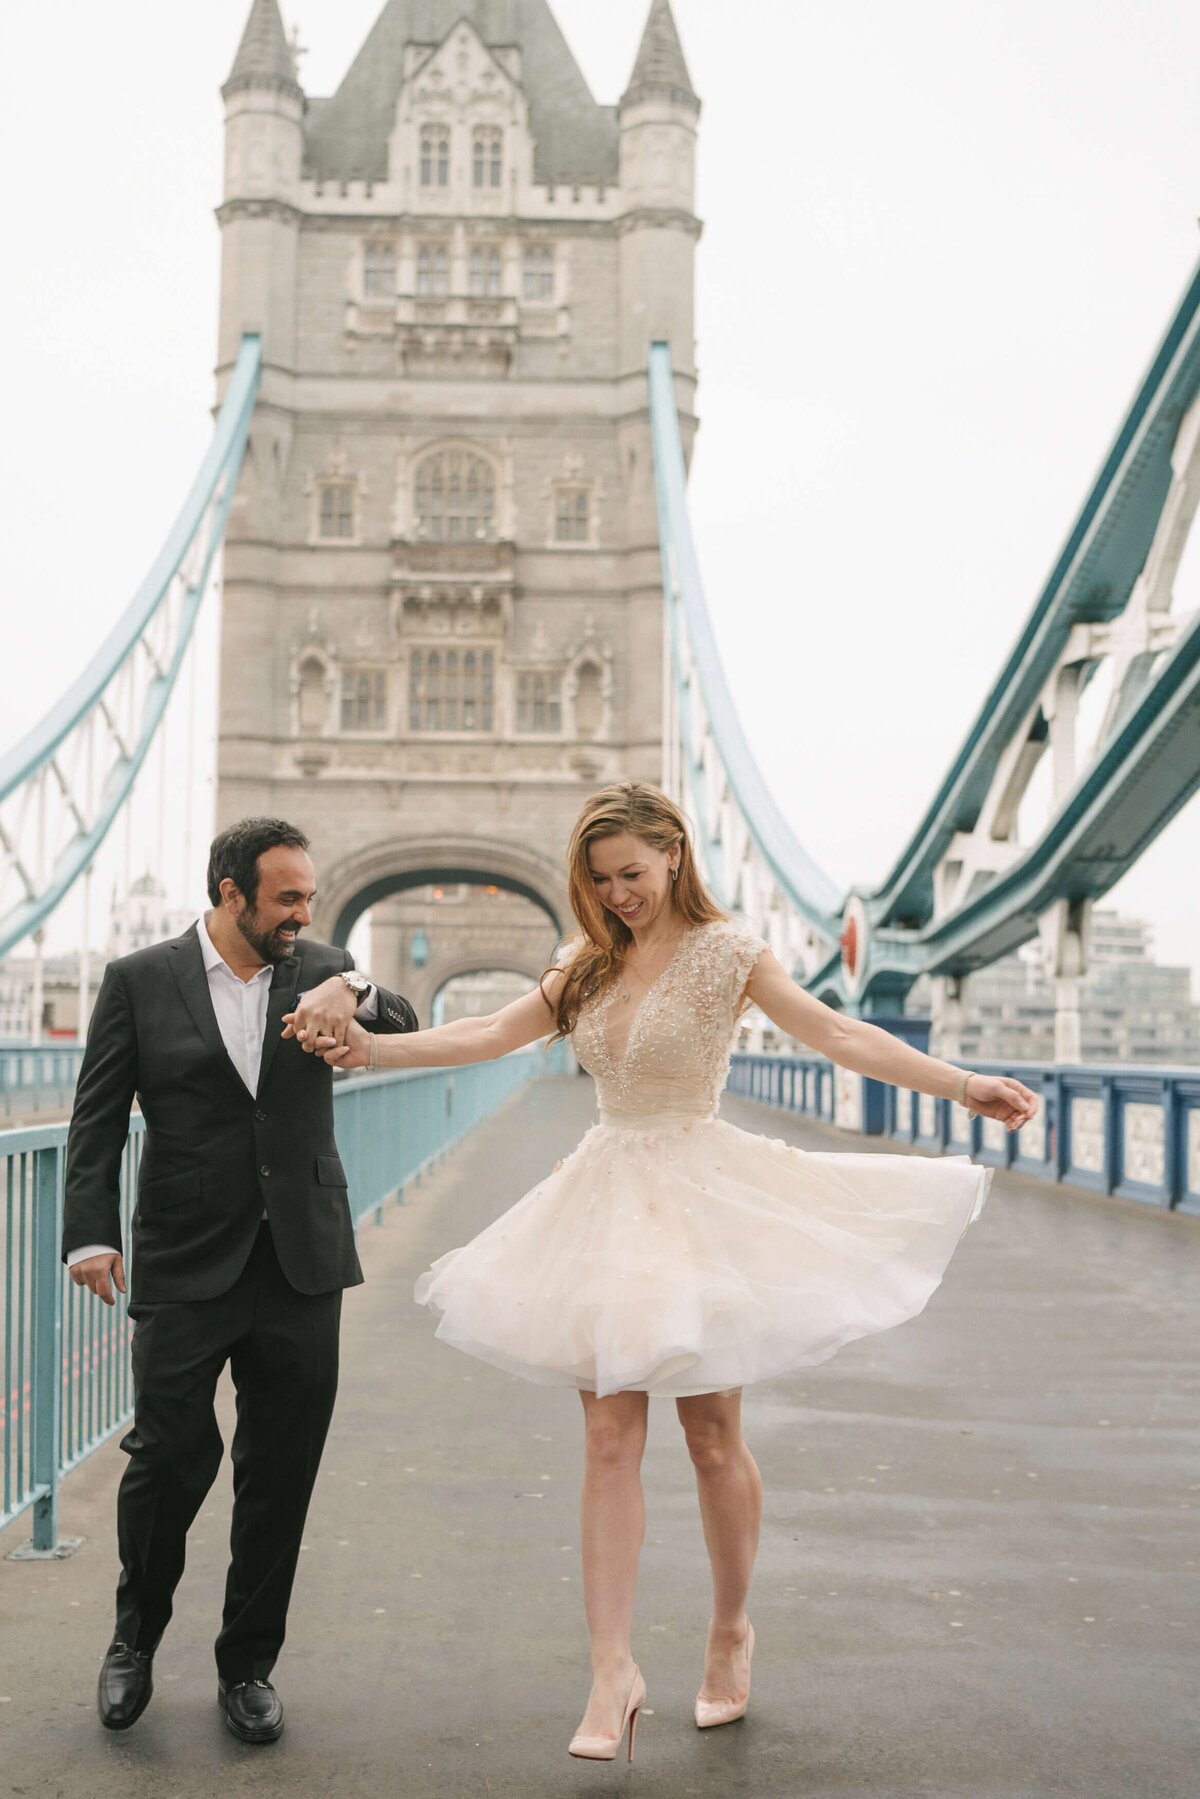 relaxed and natural london wedding photographer-58